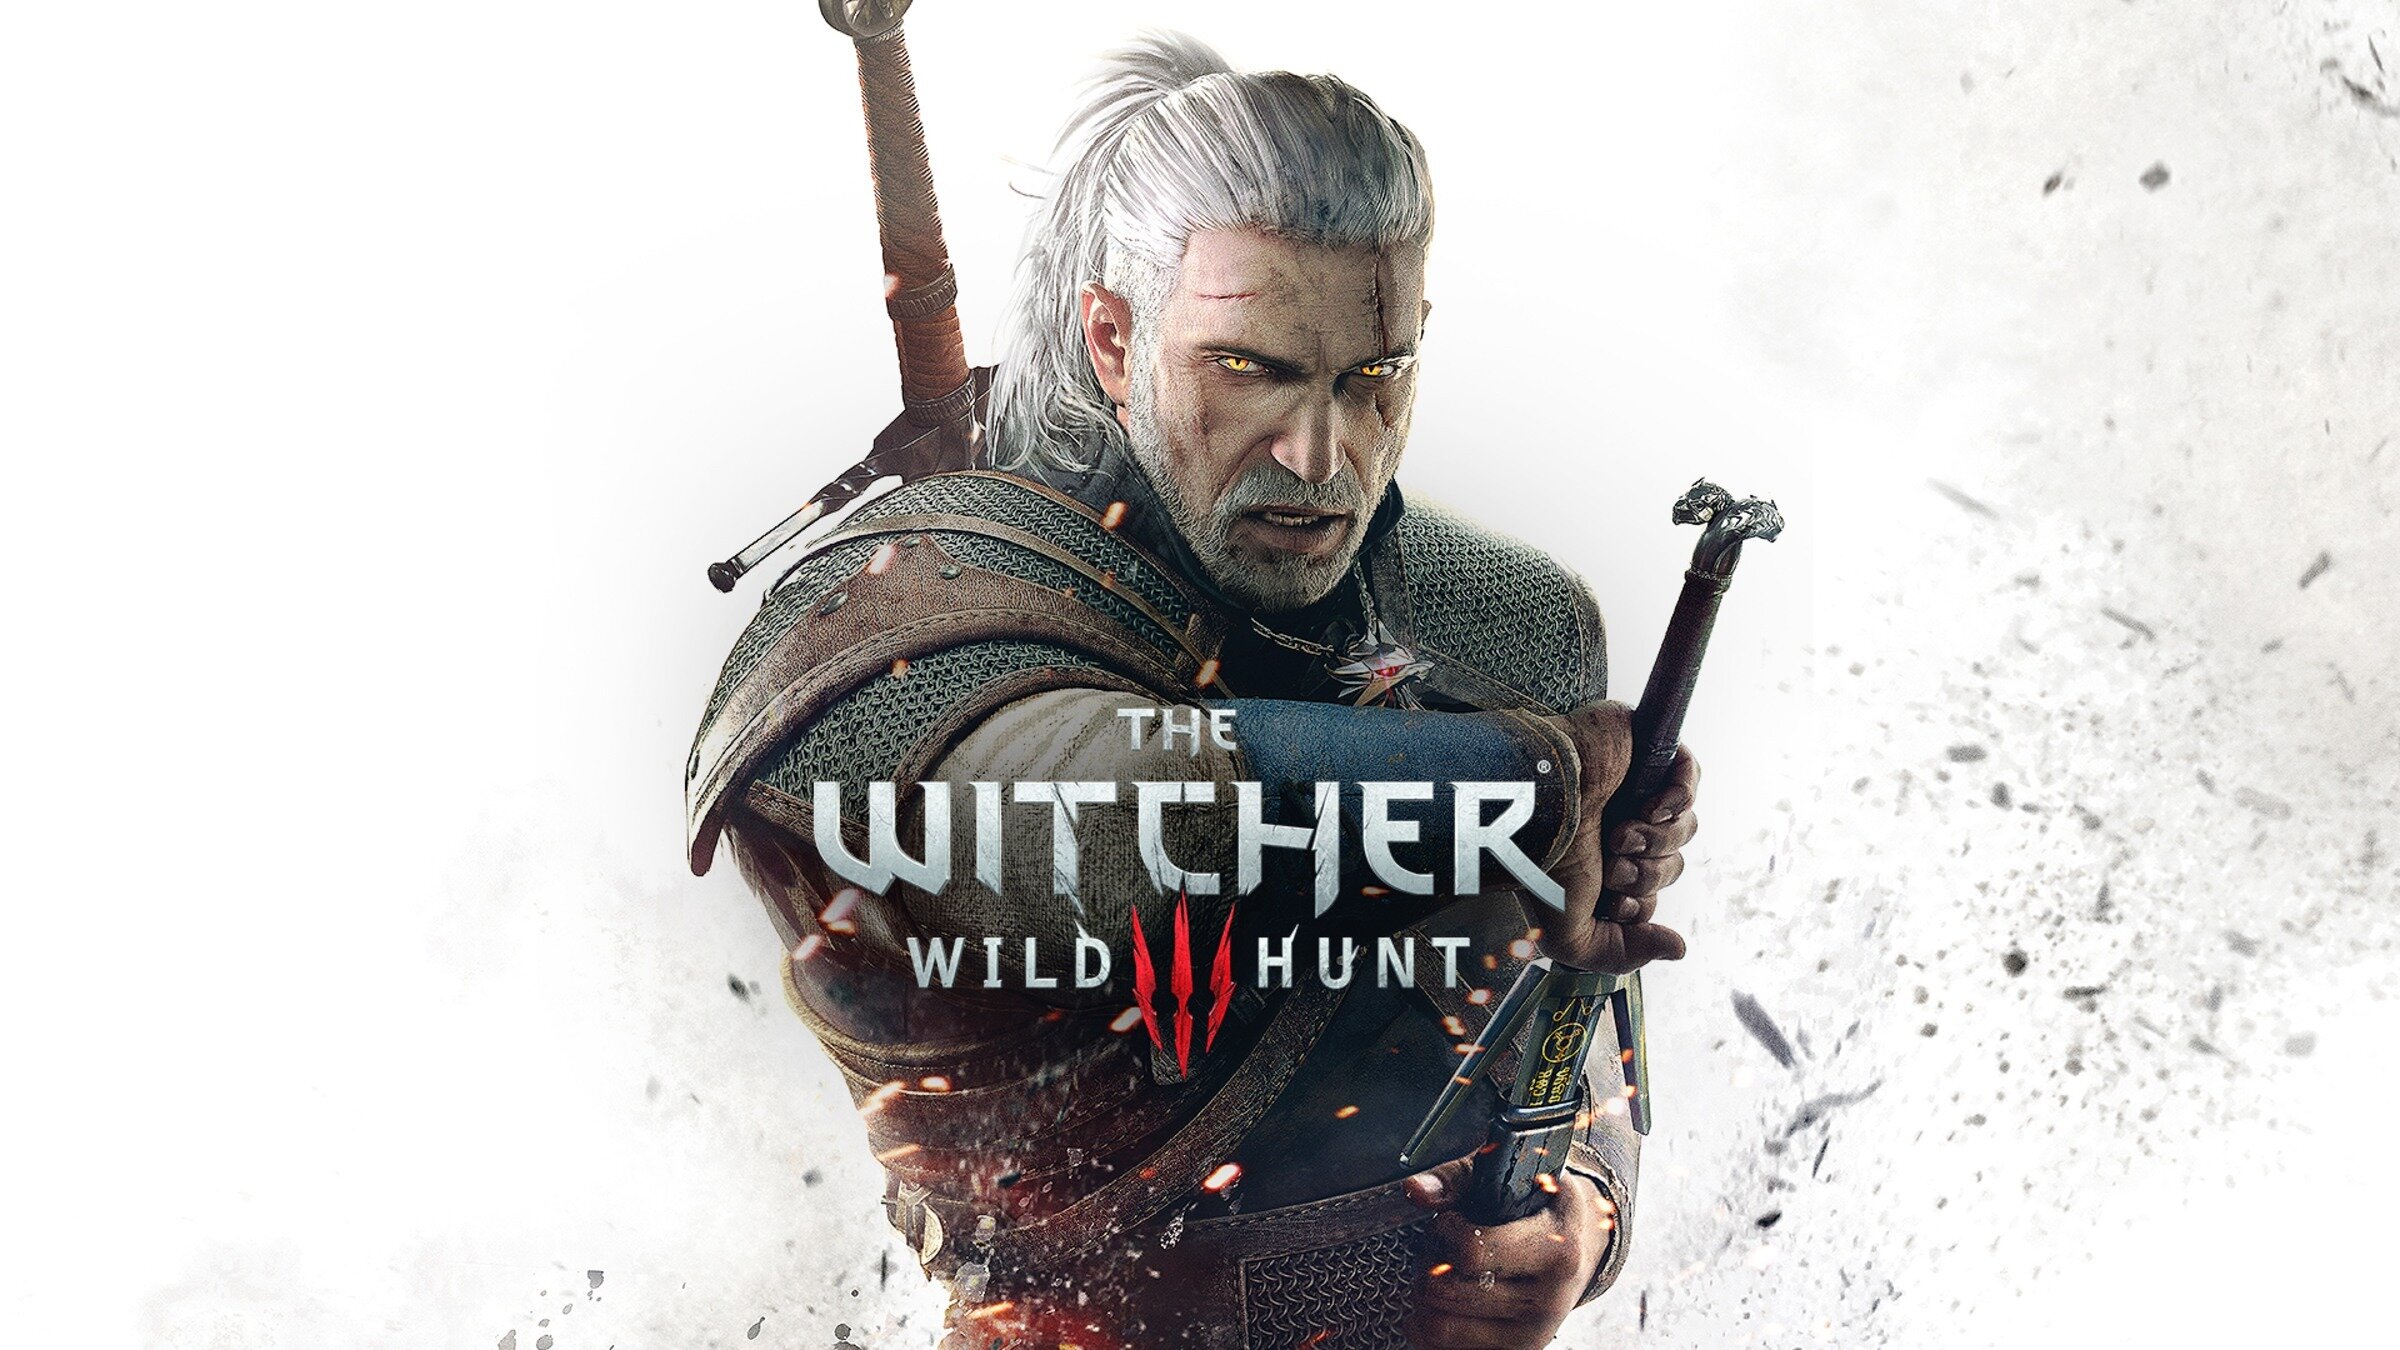 ‘The Witcher’ is officially one of the most successful game series of all time – CD Projekt Red